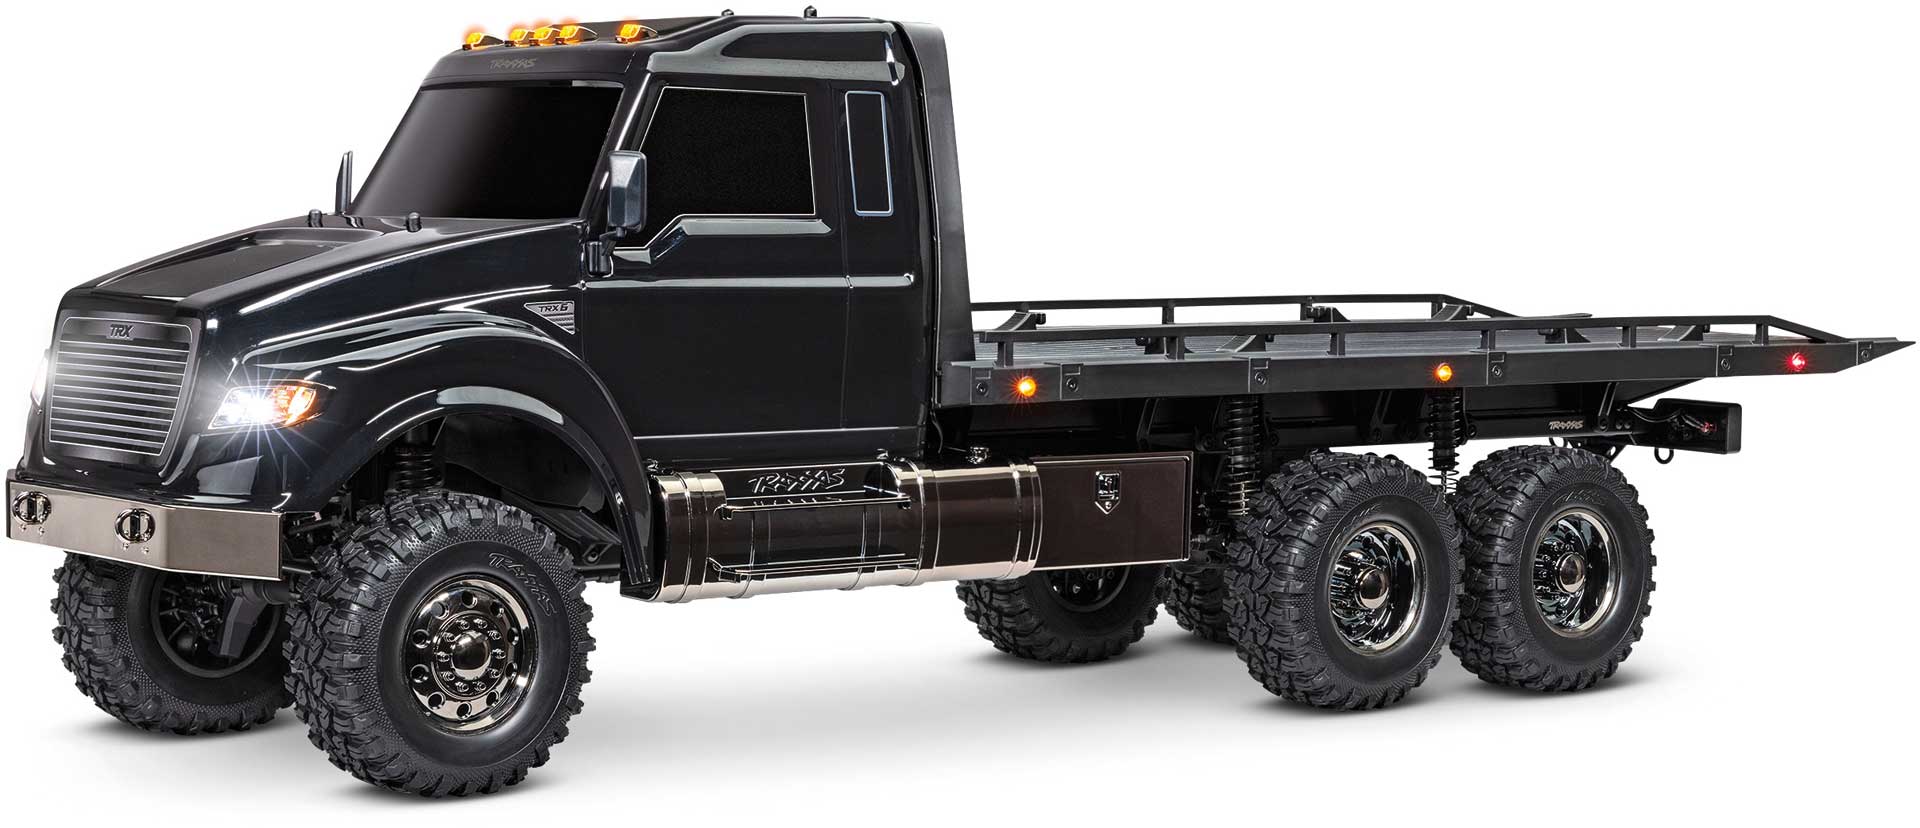 TRAXXAS TRX-6 FLATBED TRUCK 6X6 1/10 RTR O. ACCU/CHARGEUR 6WD TRUCK BRUSHED NOIR ULTIMATE RC HAULER